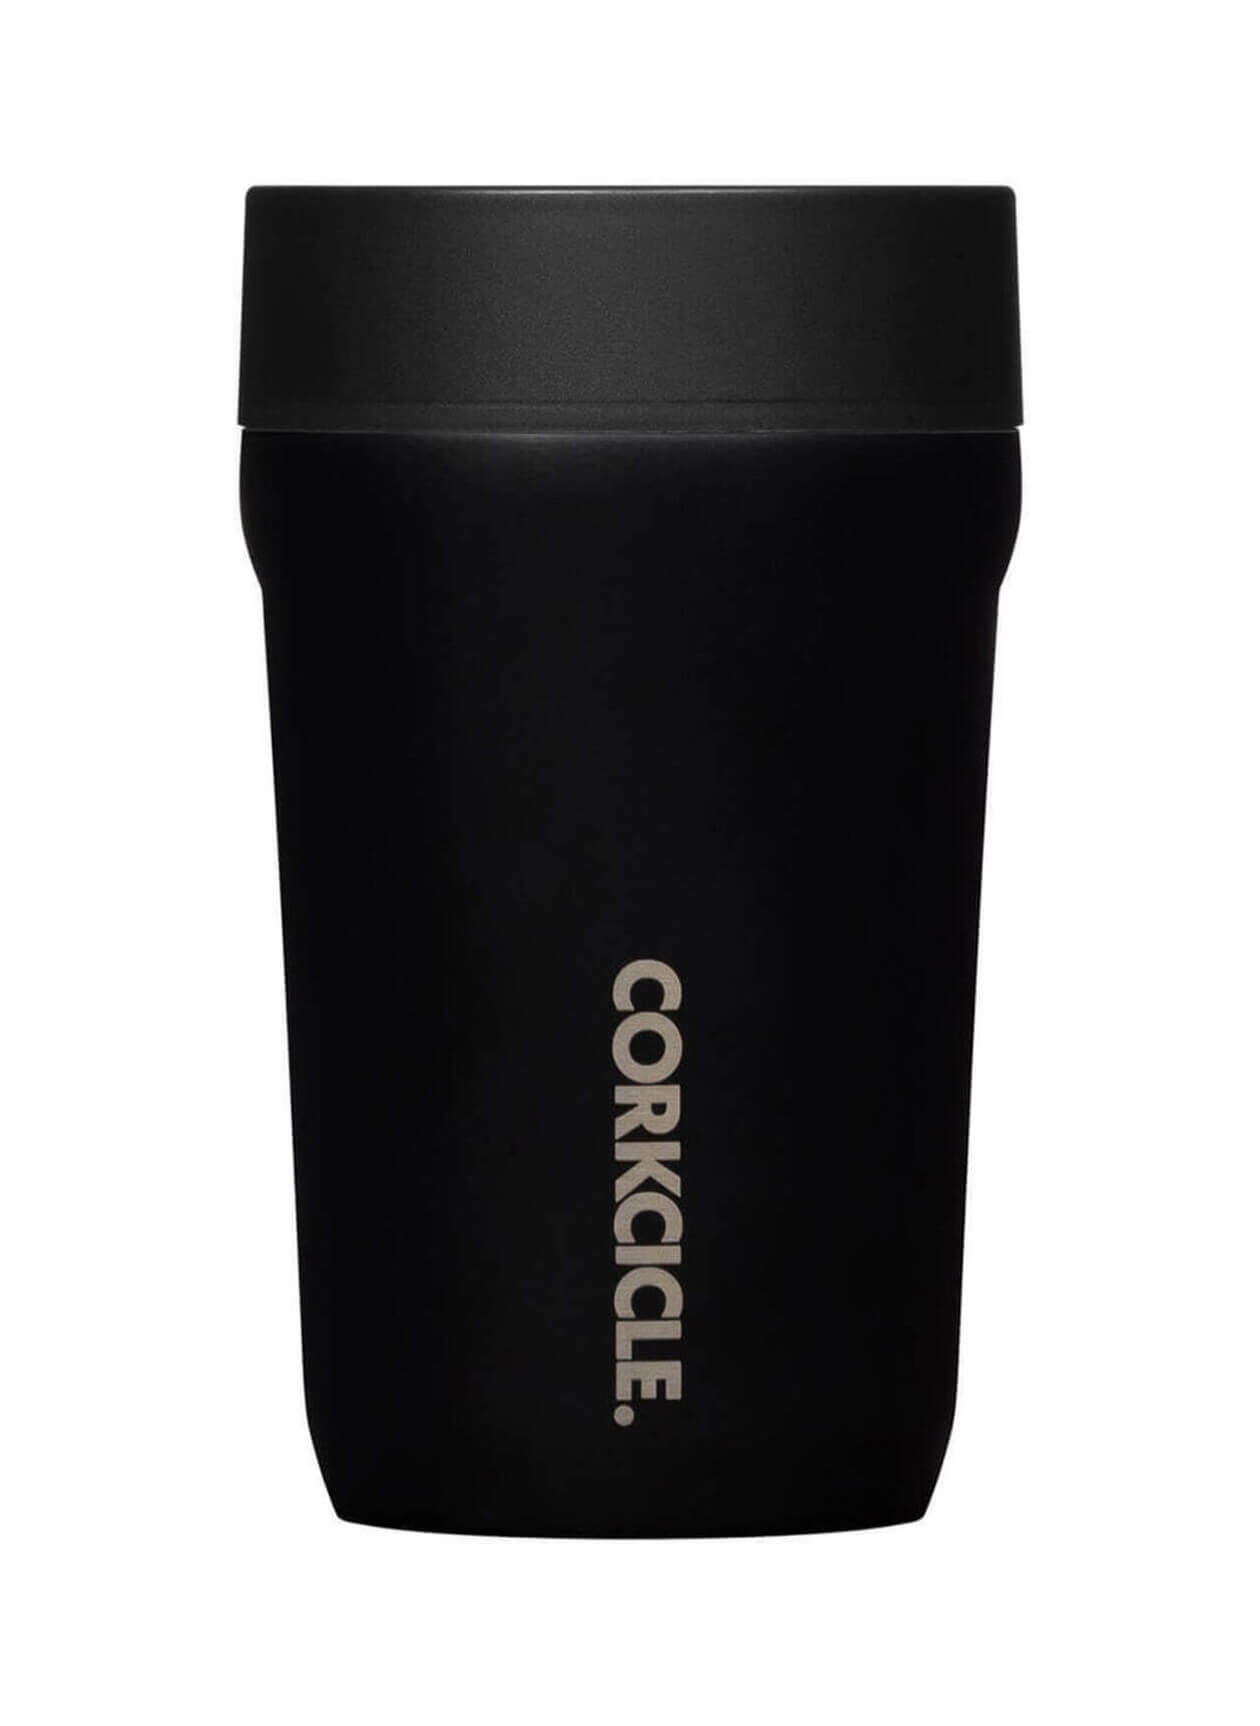 Corkcicle Commuter Cup 9 Oz Insulated Spill Proof Travel Mug